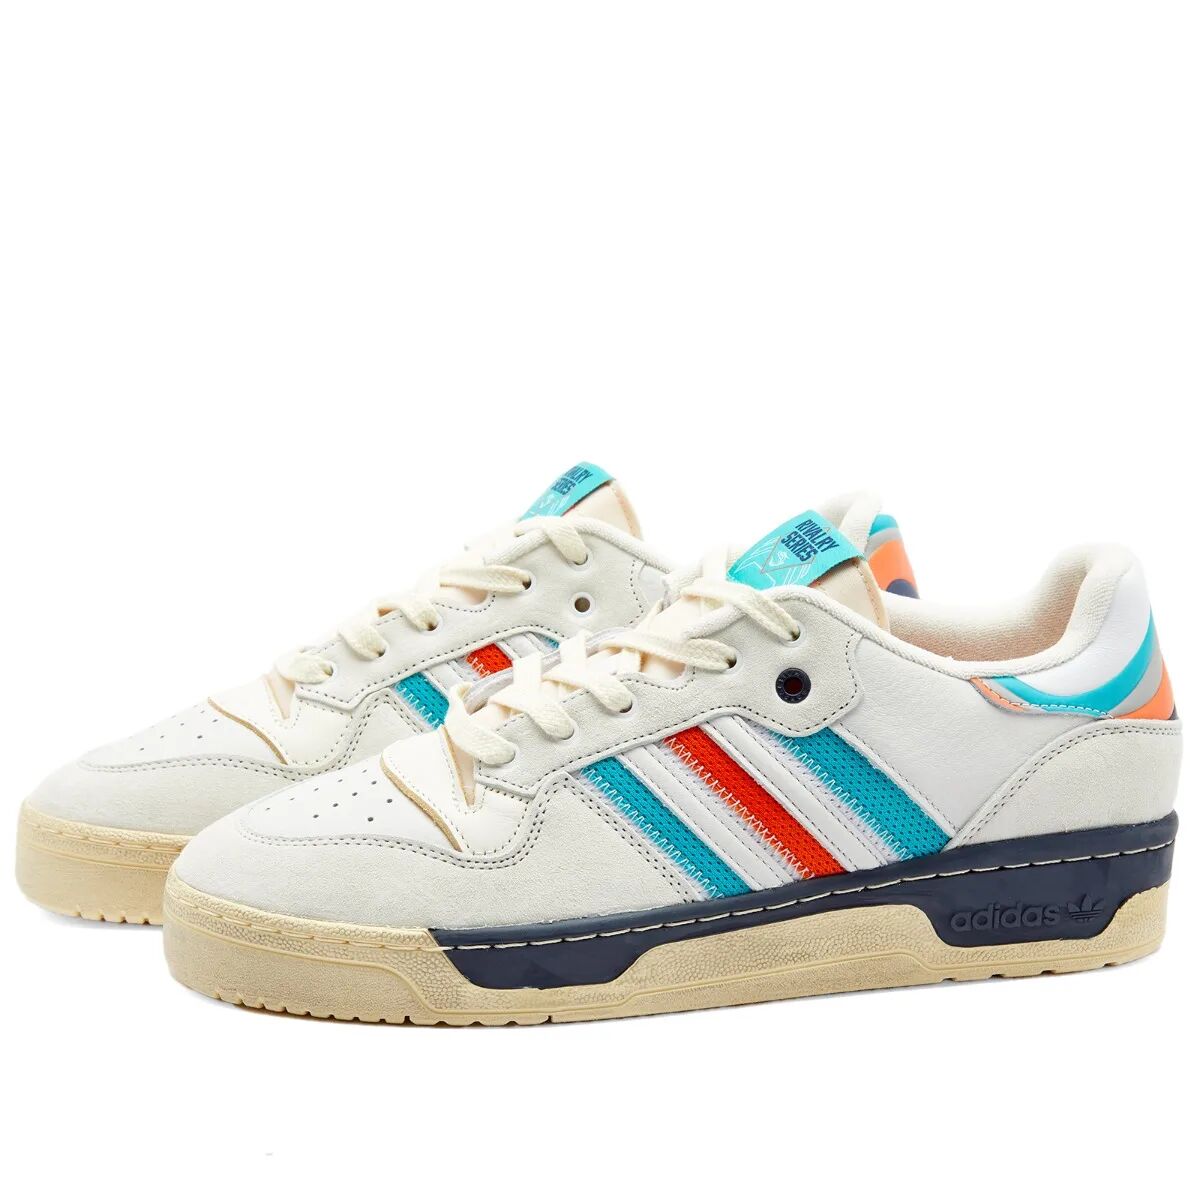 Adidas Men's Rivalry Low Extra Butter Sneakers in Crystal White/Pantone, Size UK 7.5